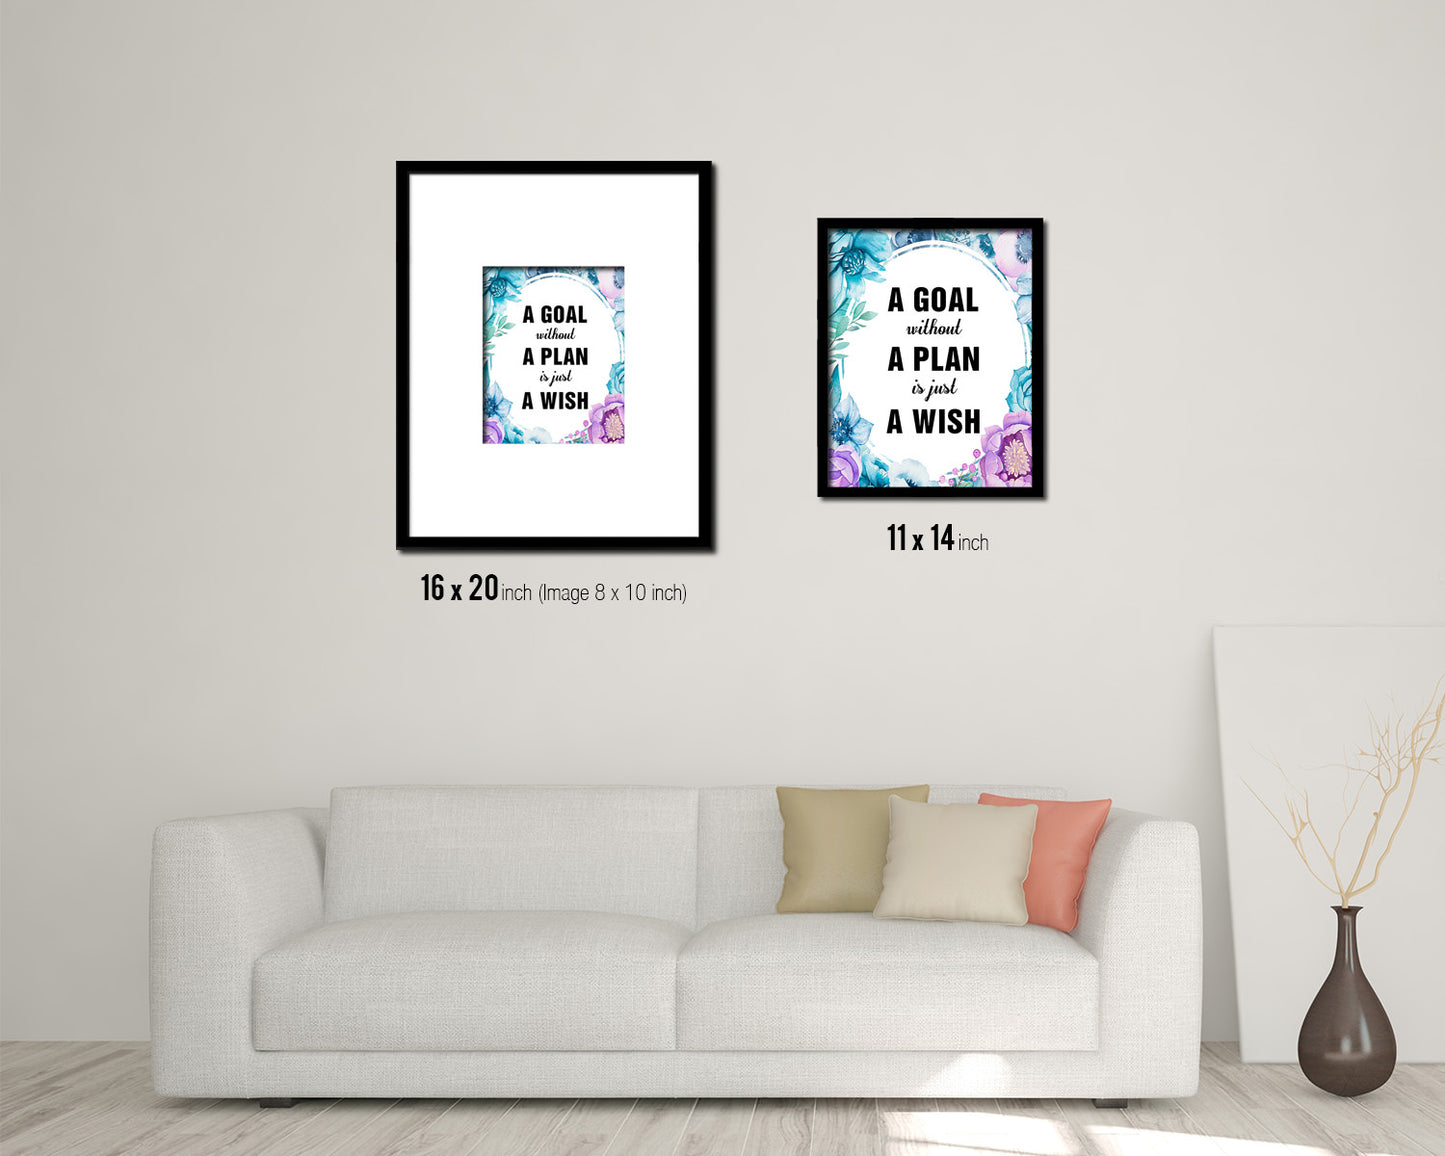 A goal without a plan is just a wish Quote Boho Flower Framed Print Wall Decor Art